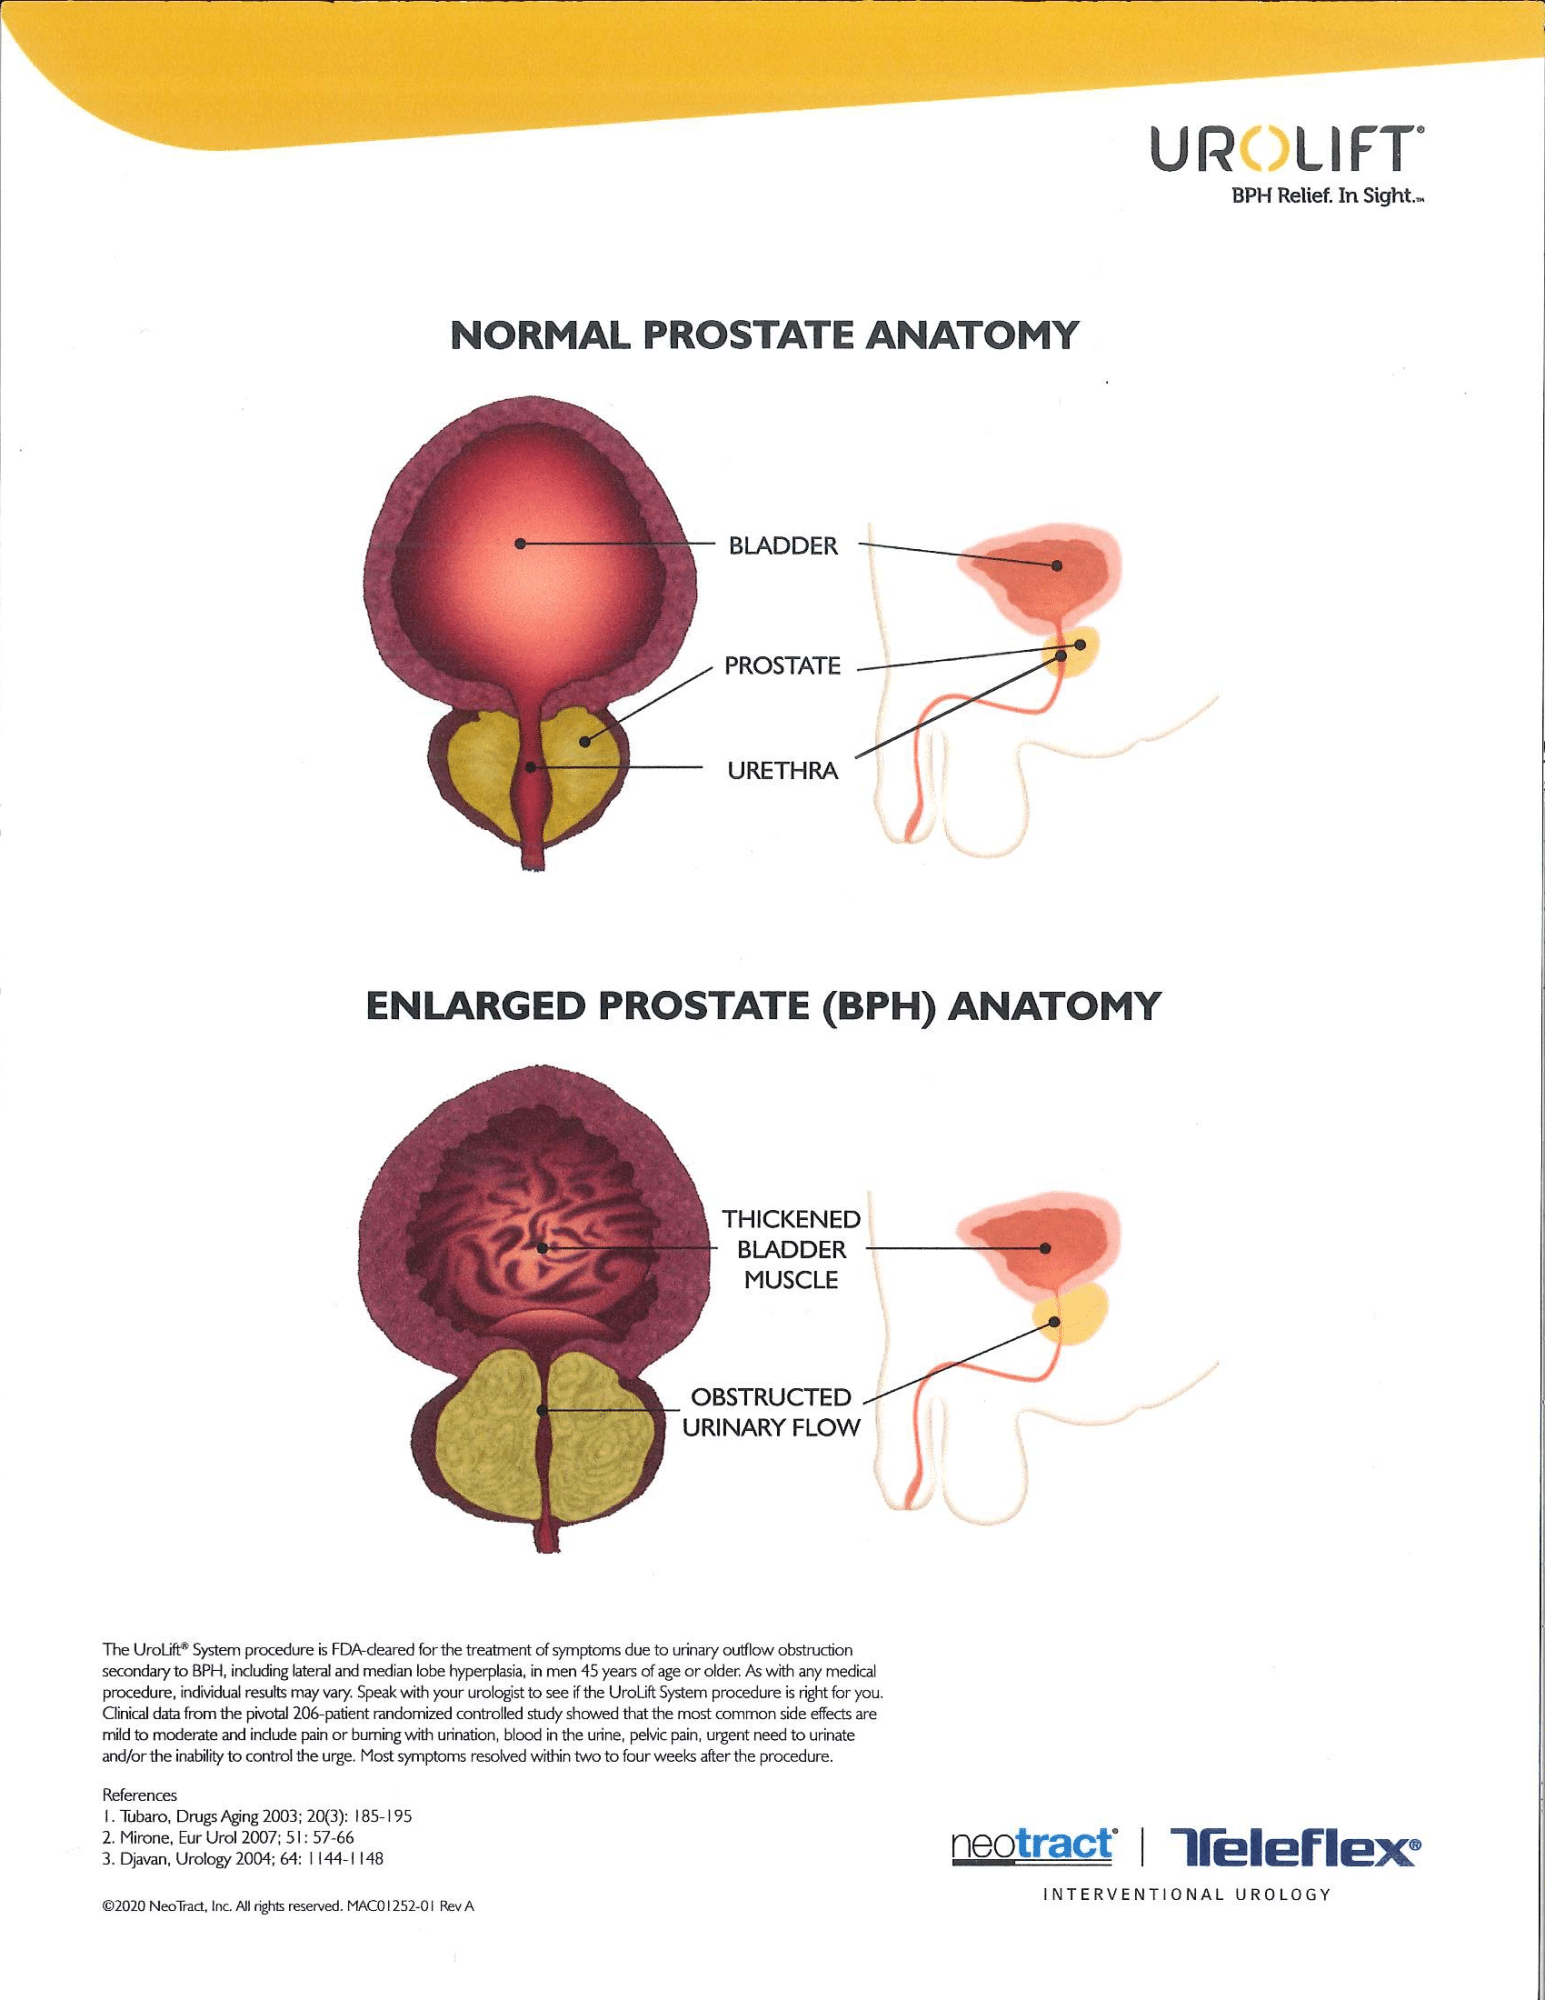 An Enlarged Prostate Causes Urinary Outflow Obstruction For Men